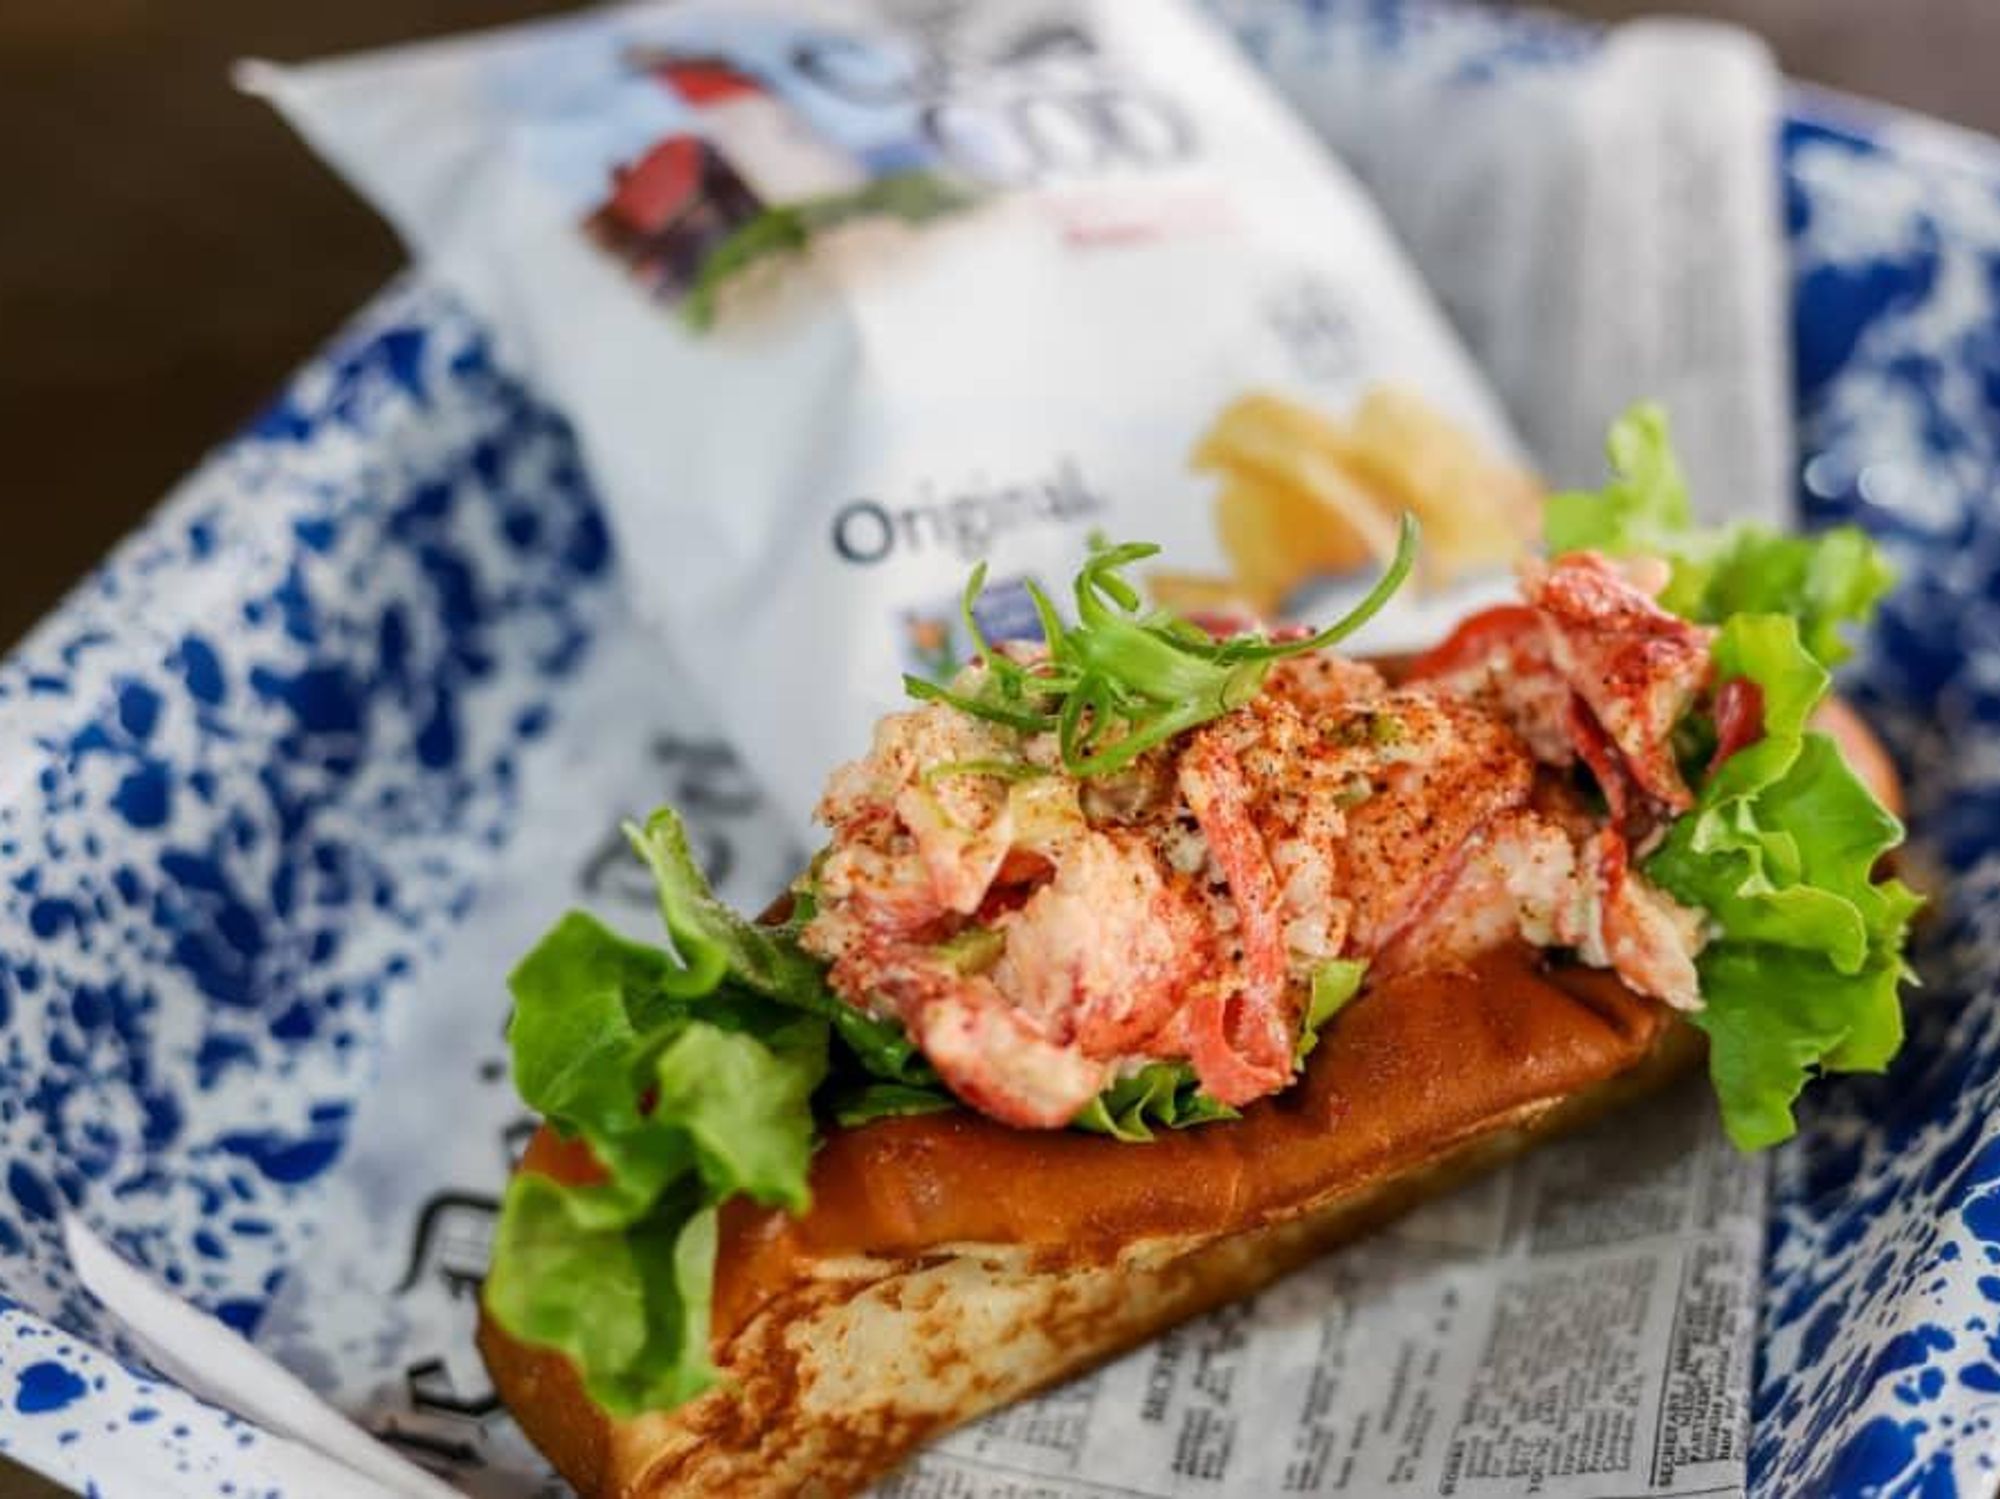 A lobster roll on a blue and white ceramic plate with Cape Cod chips.